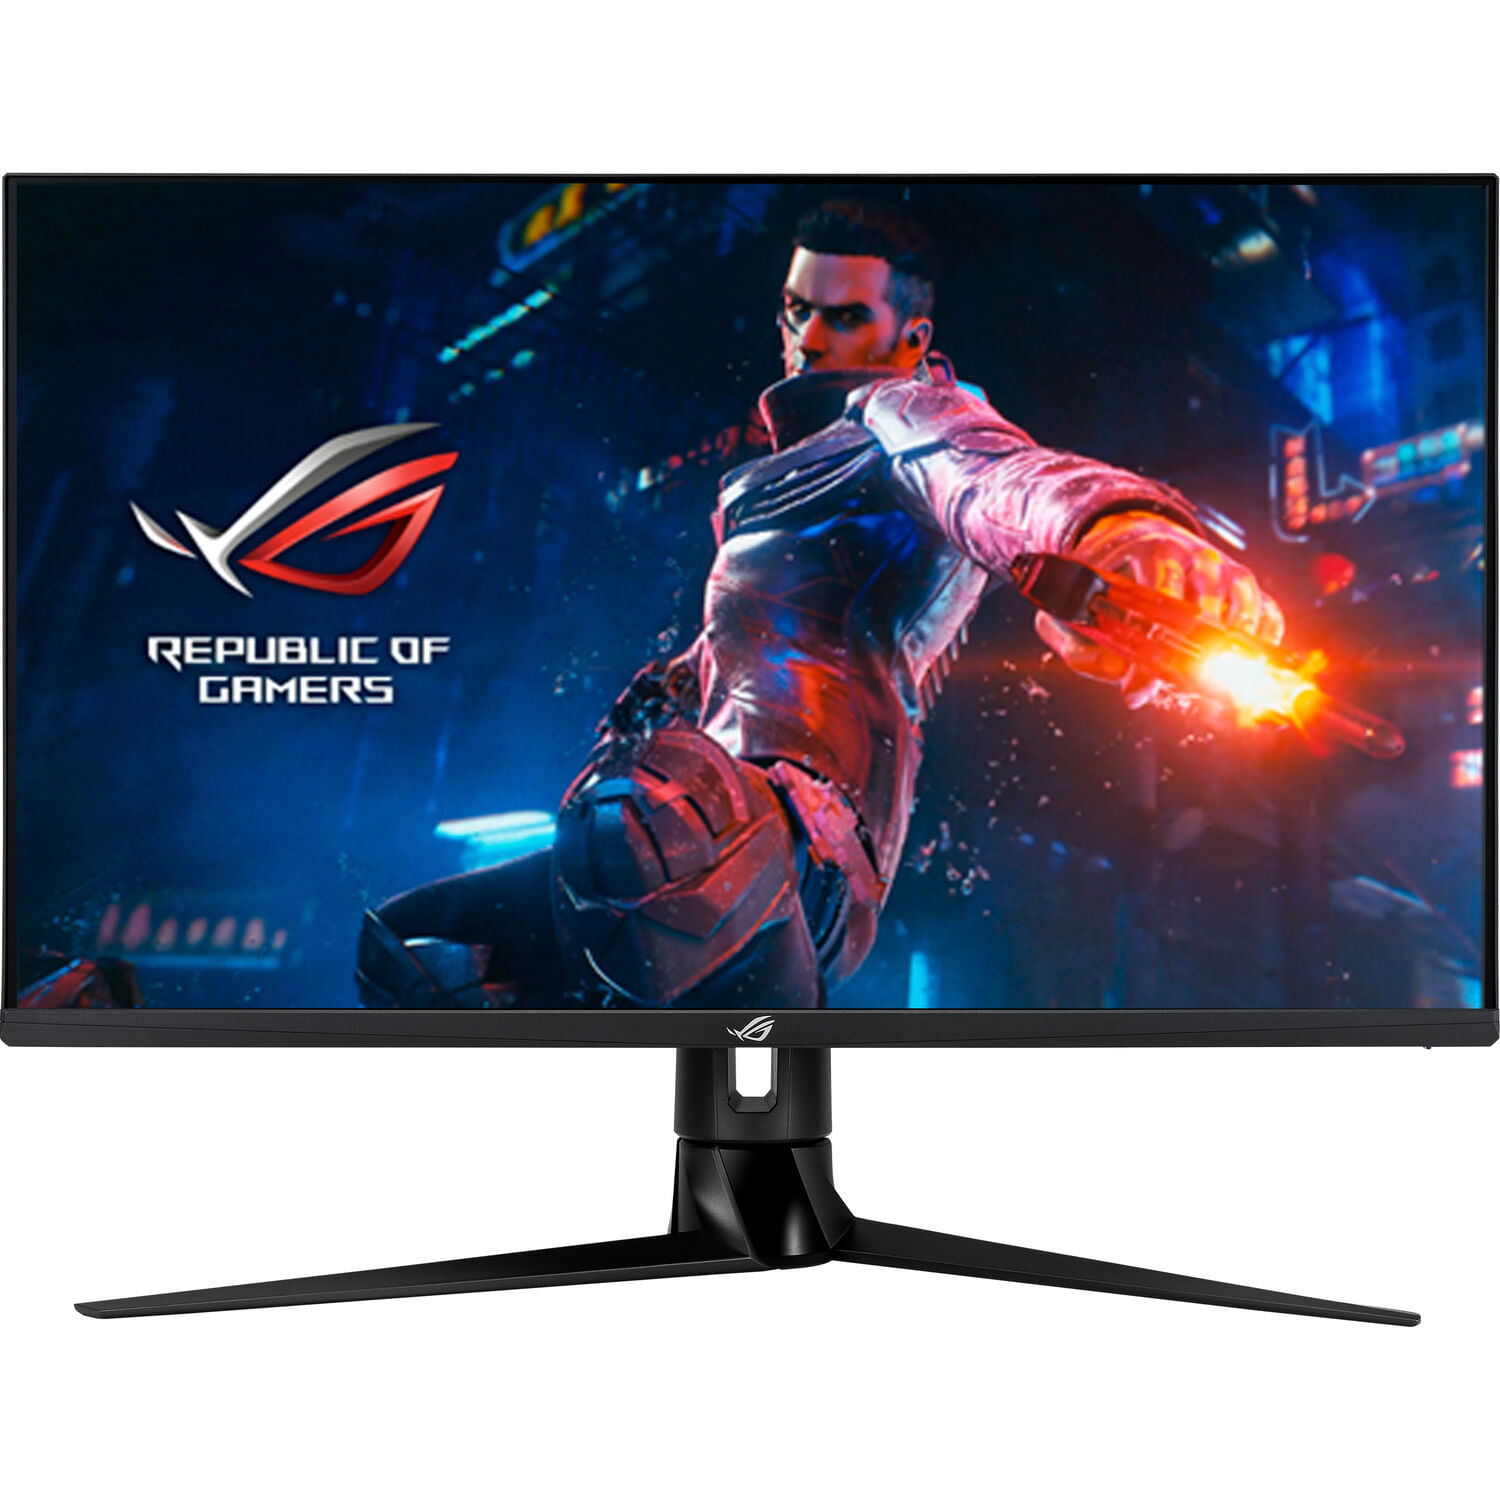 Asus Republic Of Gamers Swift Pg329Q 32" 16:9 175 Hz G-Sync Qhd Hdr Ips Gaming Monitor